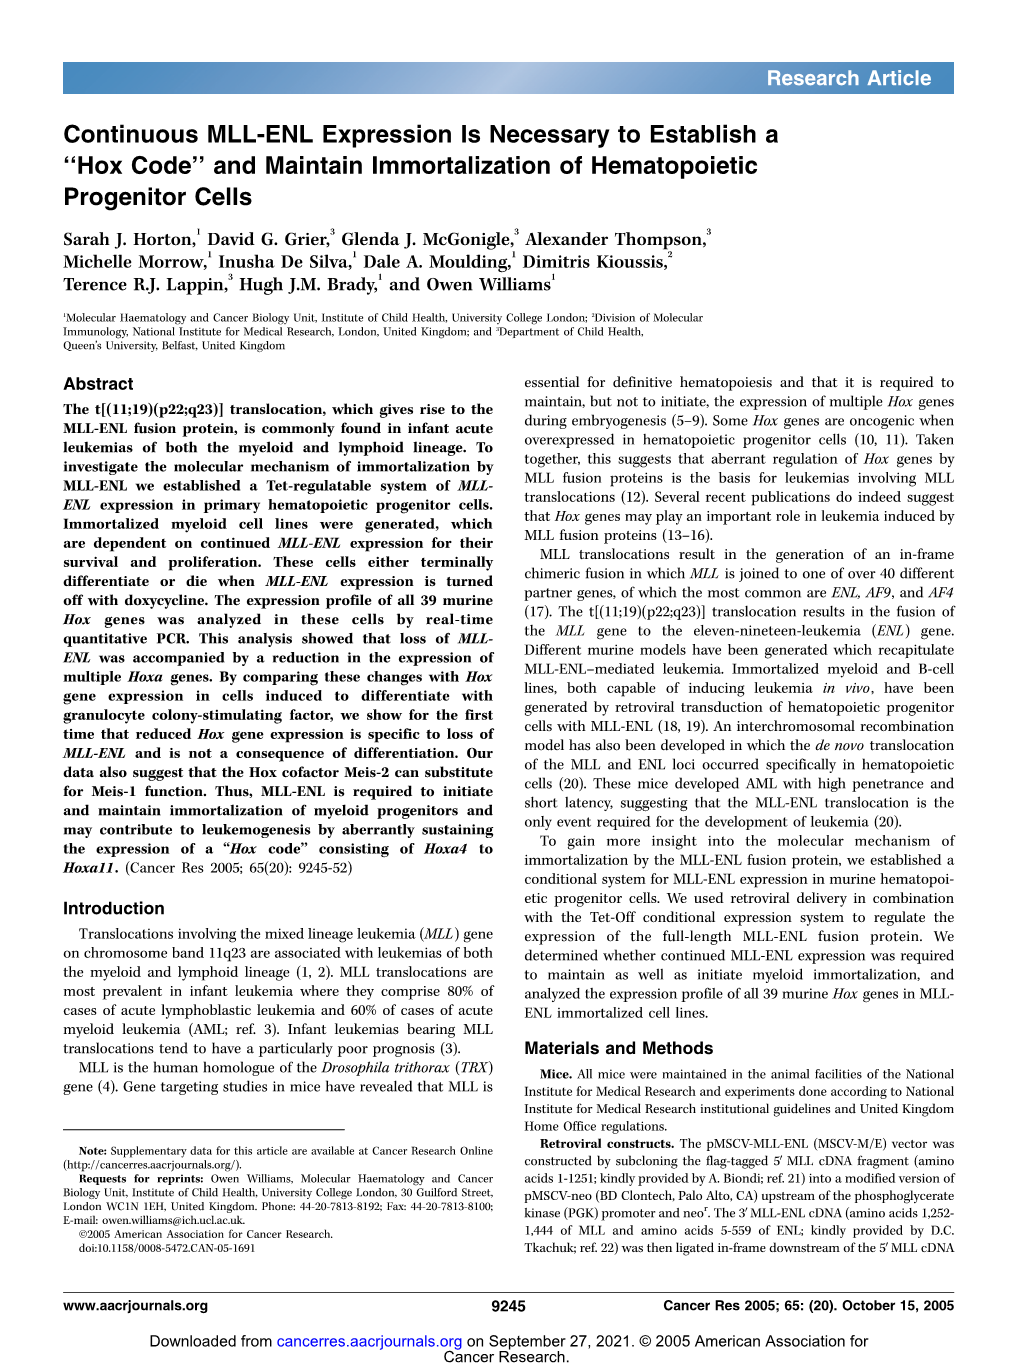 Continuous MLL-ENL Expression Is Necessary to Establish a ''Hox Code'' and Maintain Immortalization of Hematopoietic Progenitor Cells